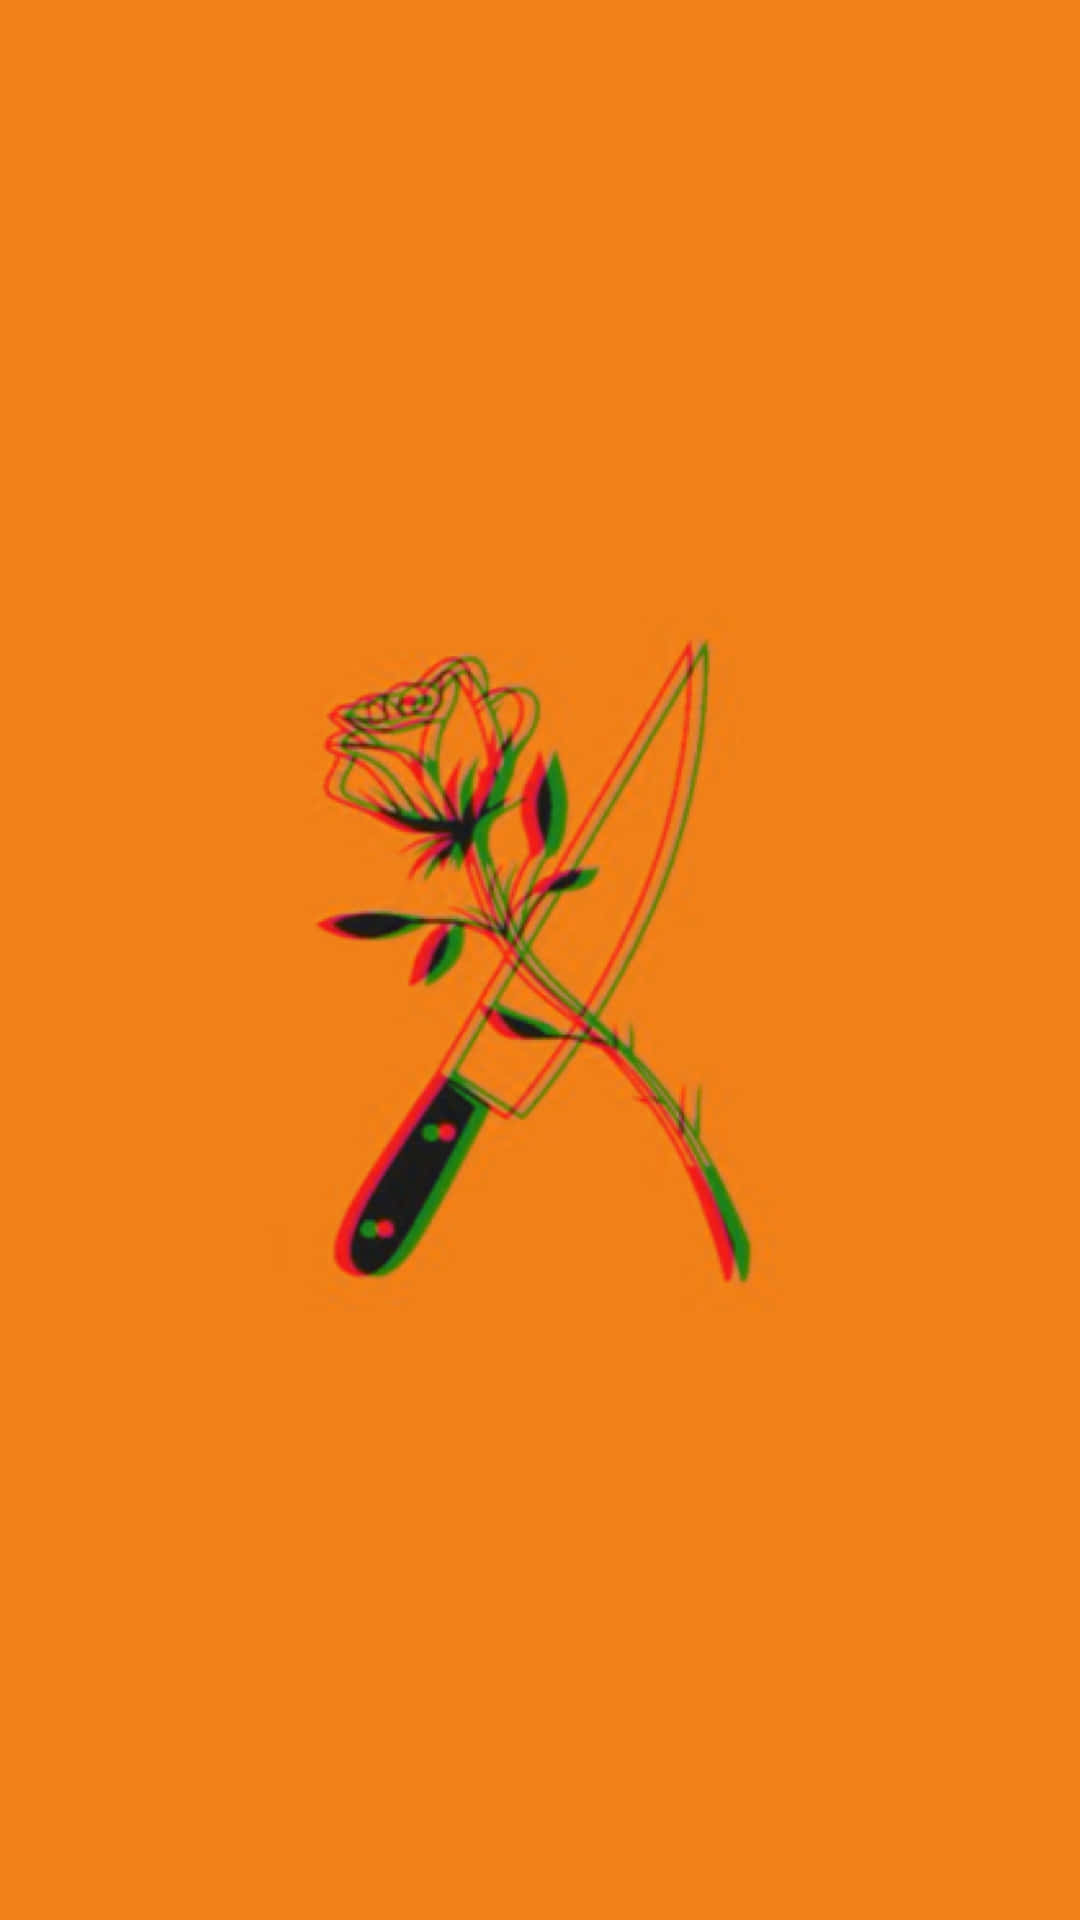 A Knife And Rose On An Orange Background